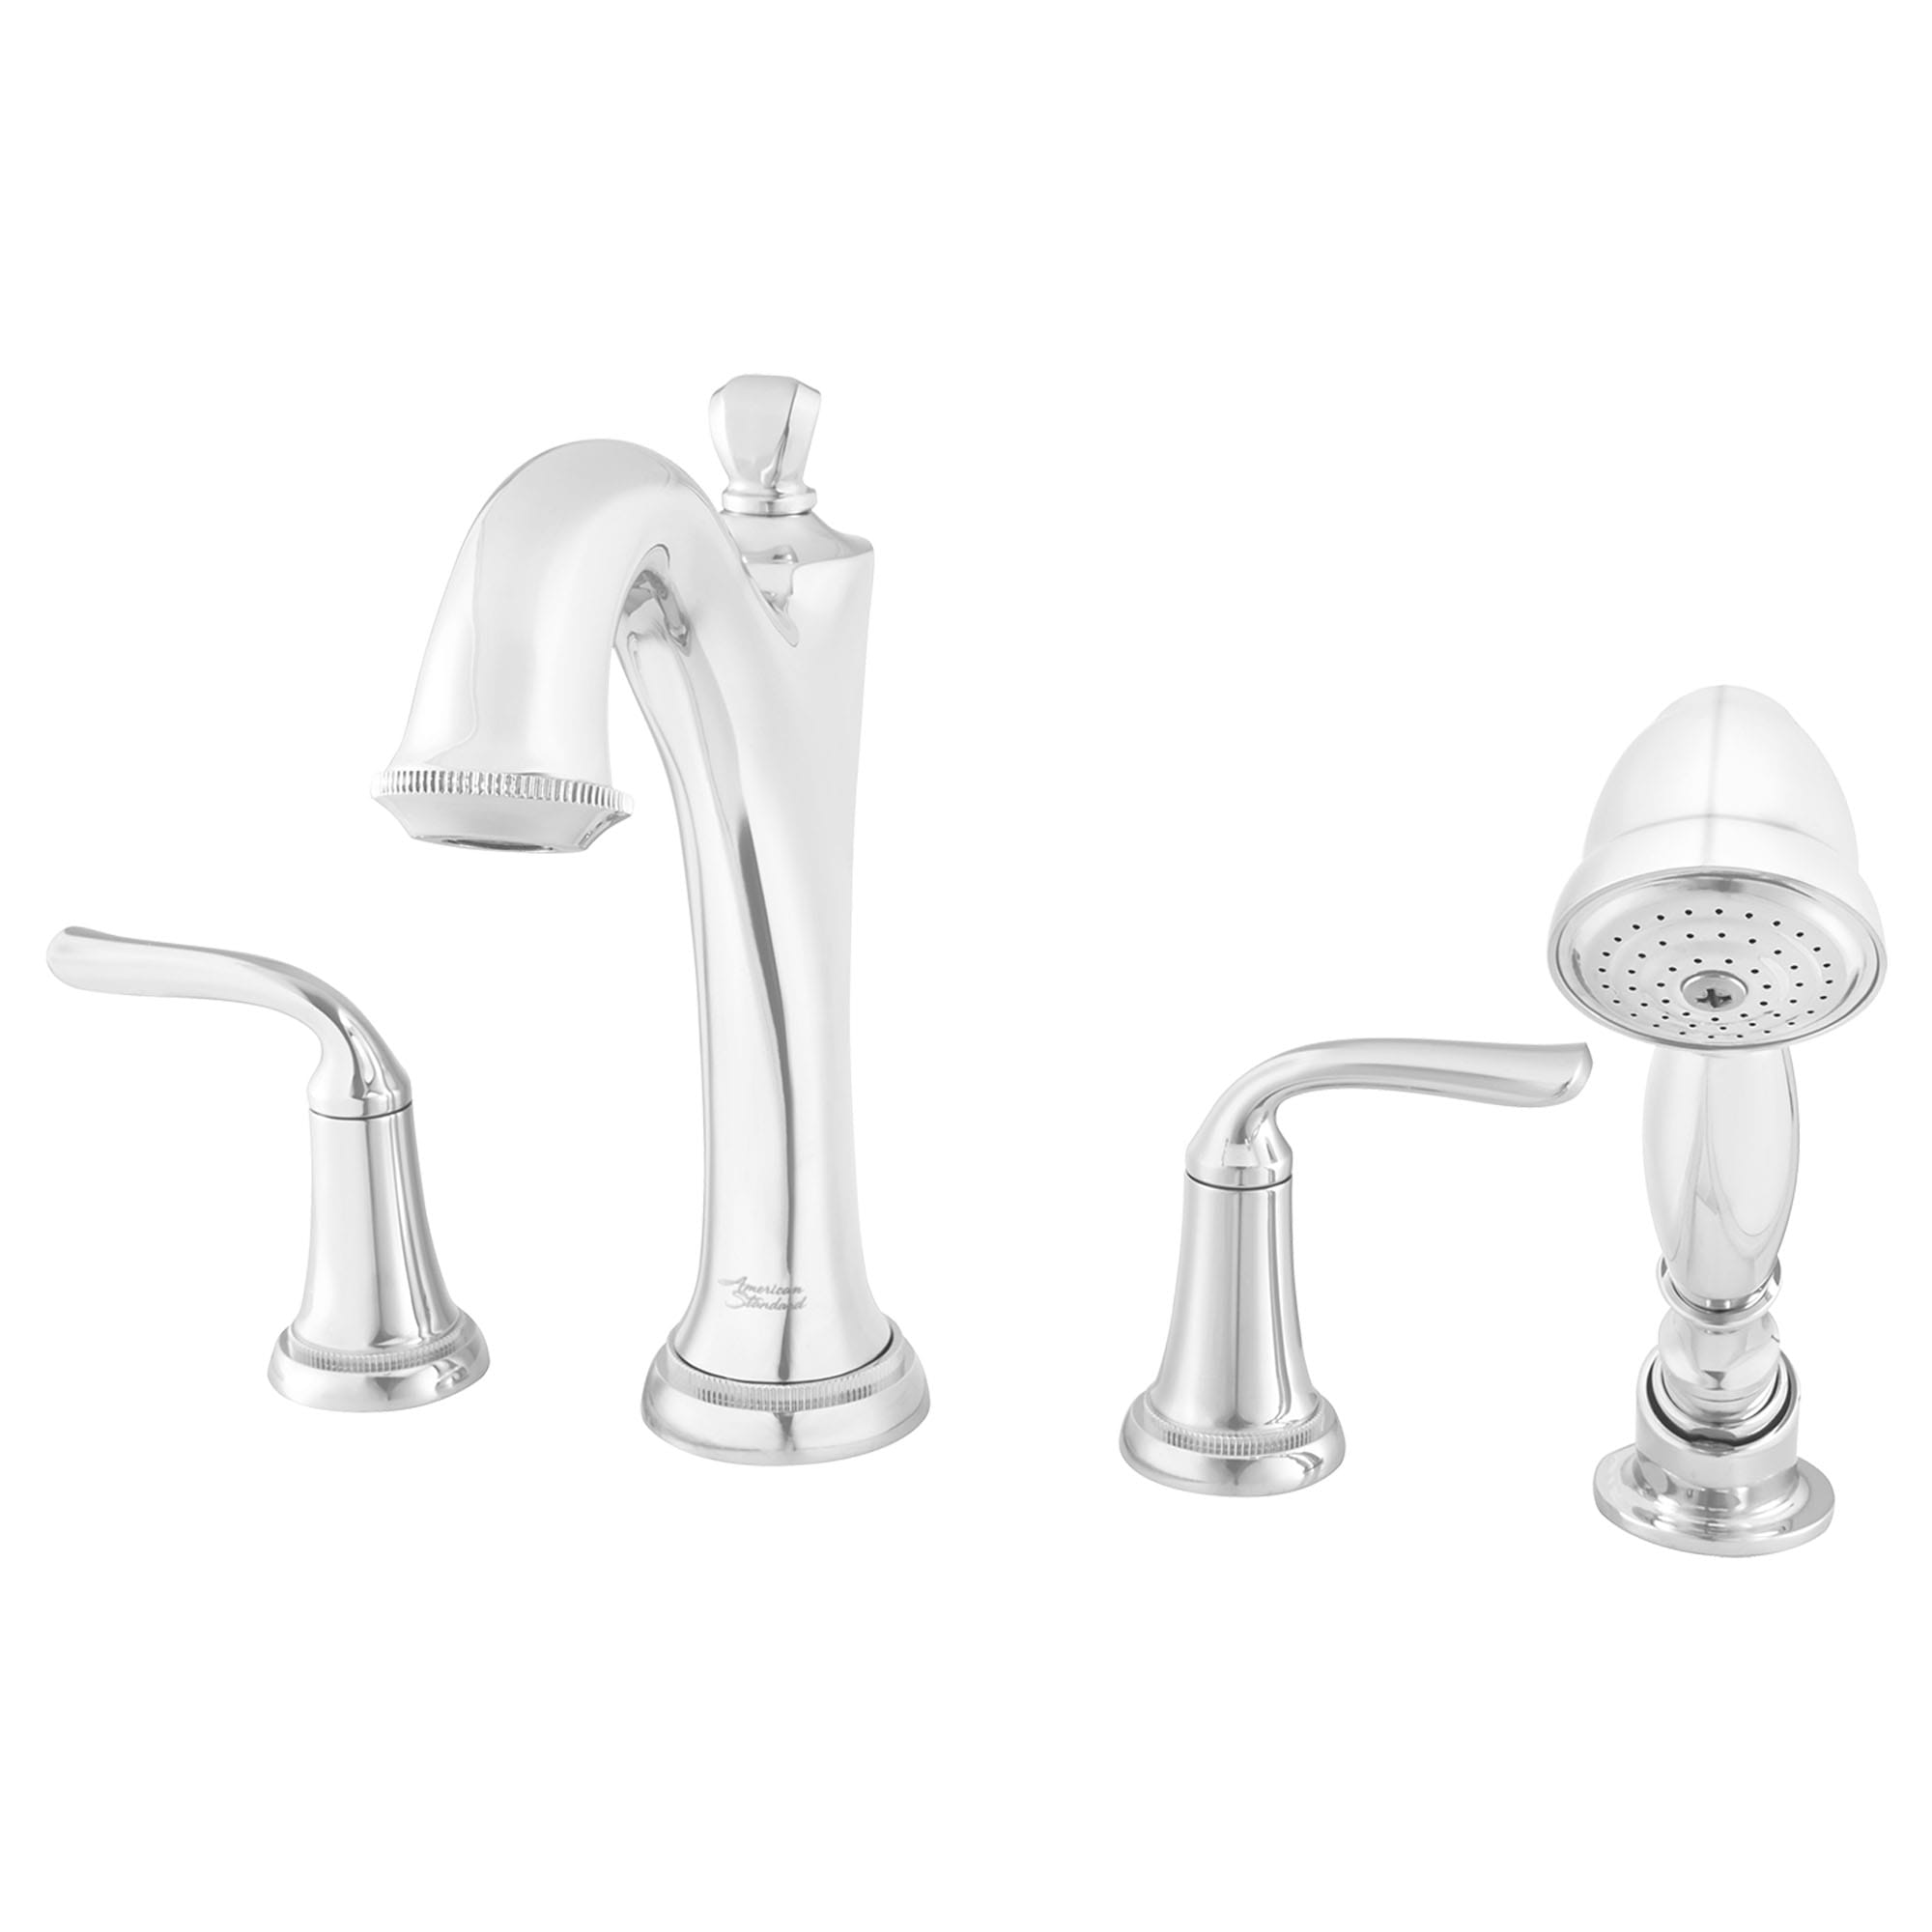 Patience Roman Tub Faucet with Hand Shower CHROME